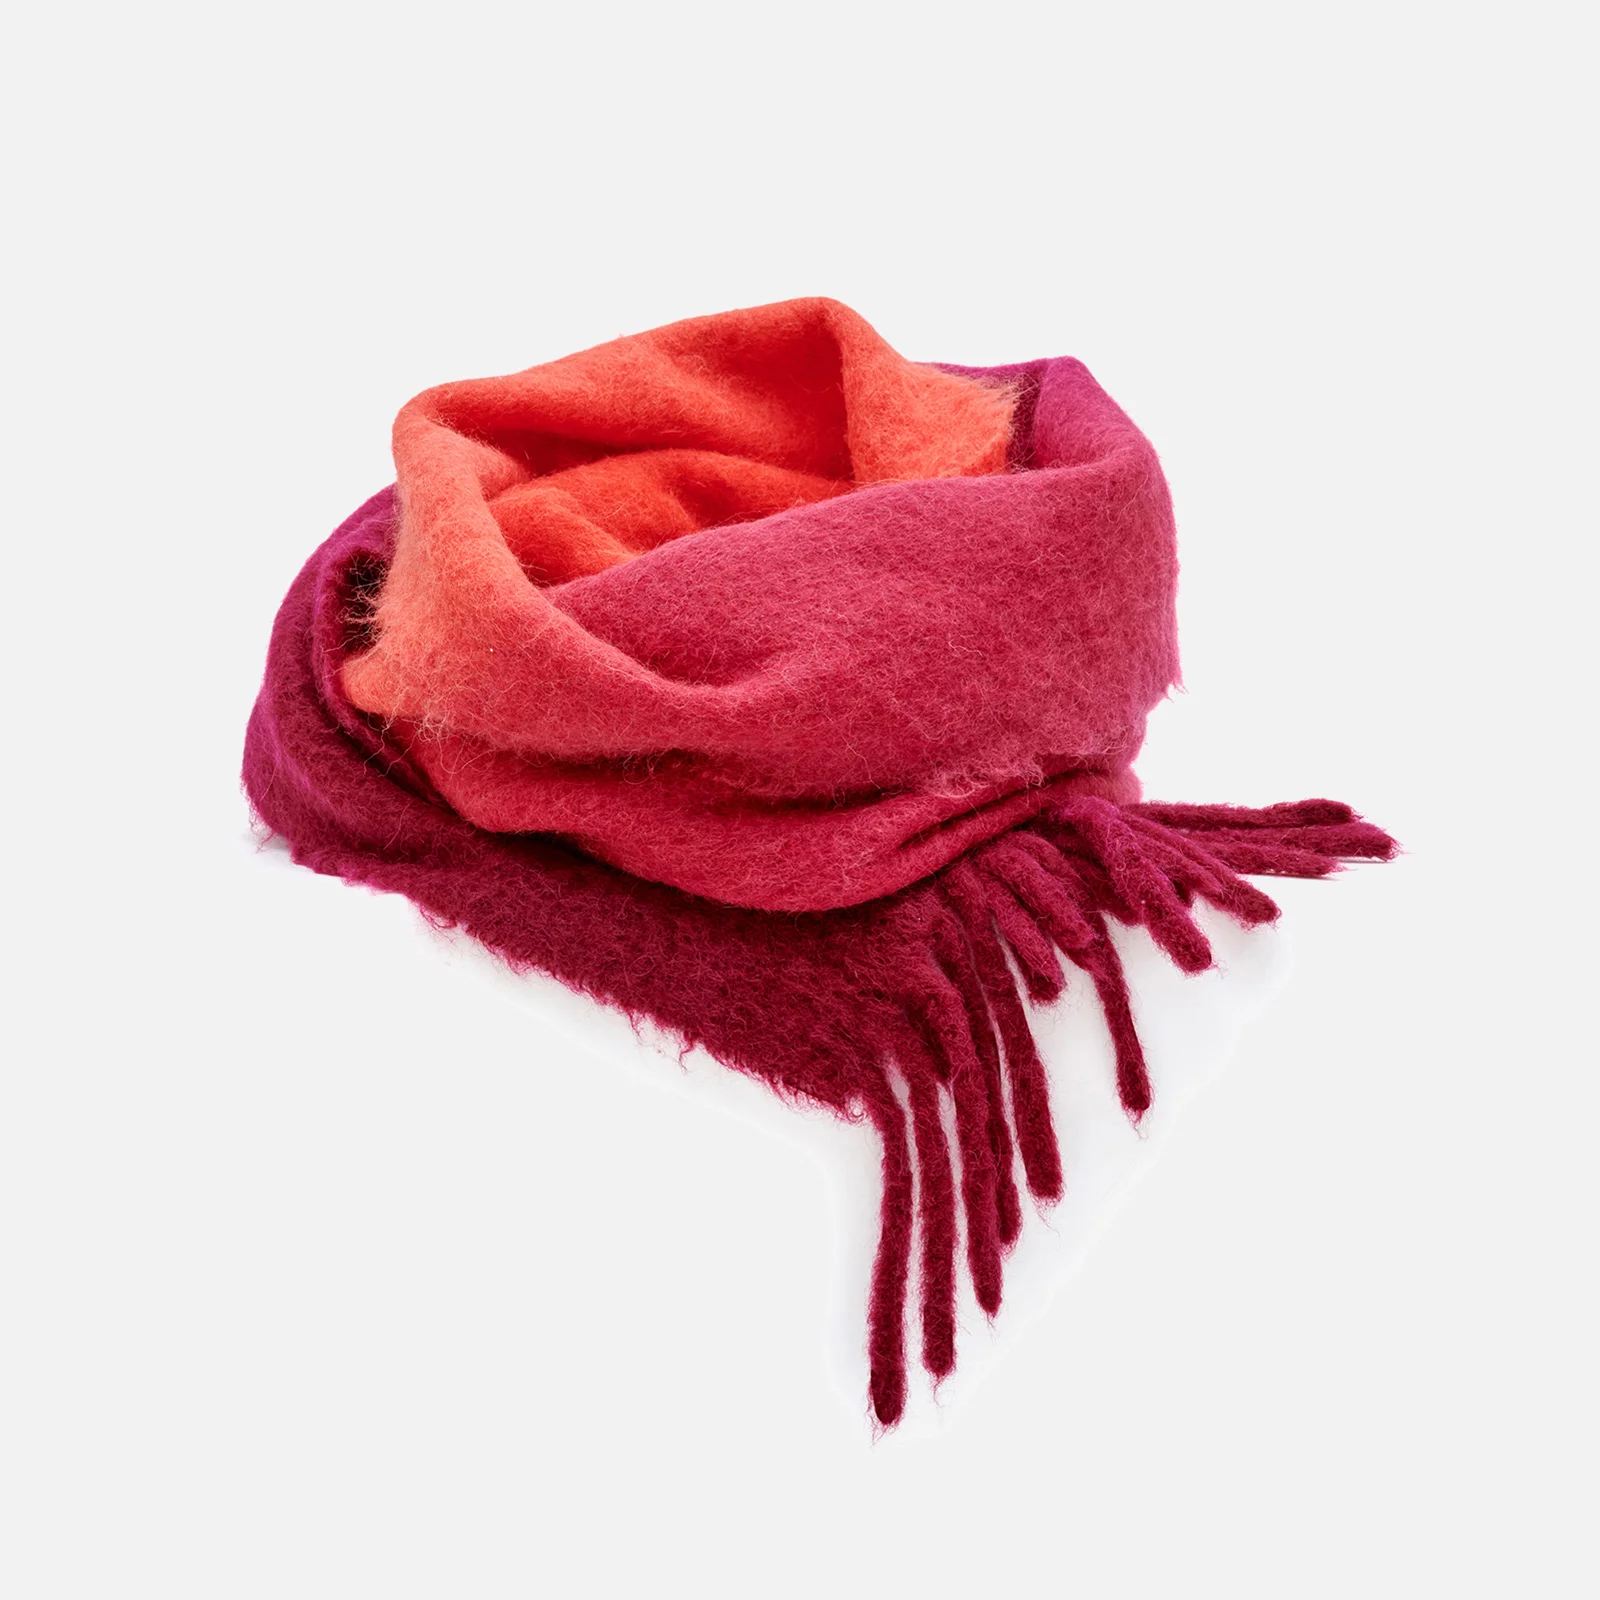 Isabel Marant Women's Firna Scarf - Red/Pink Image 1